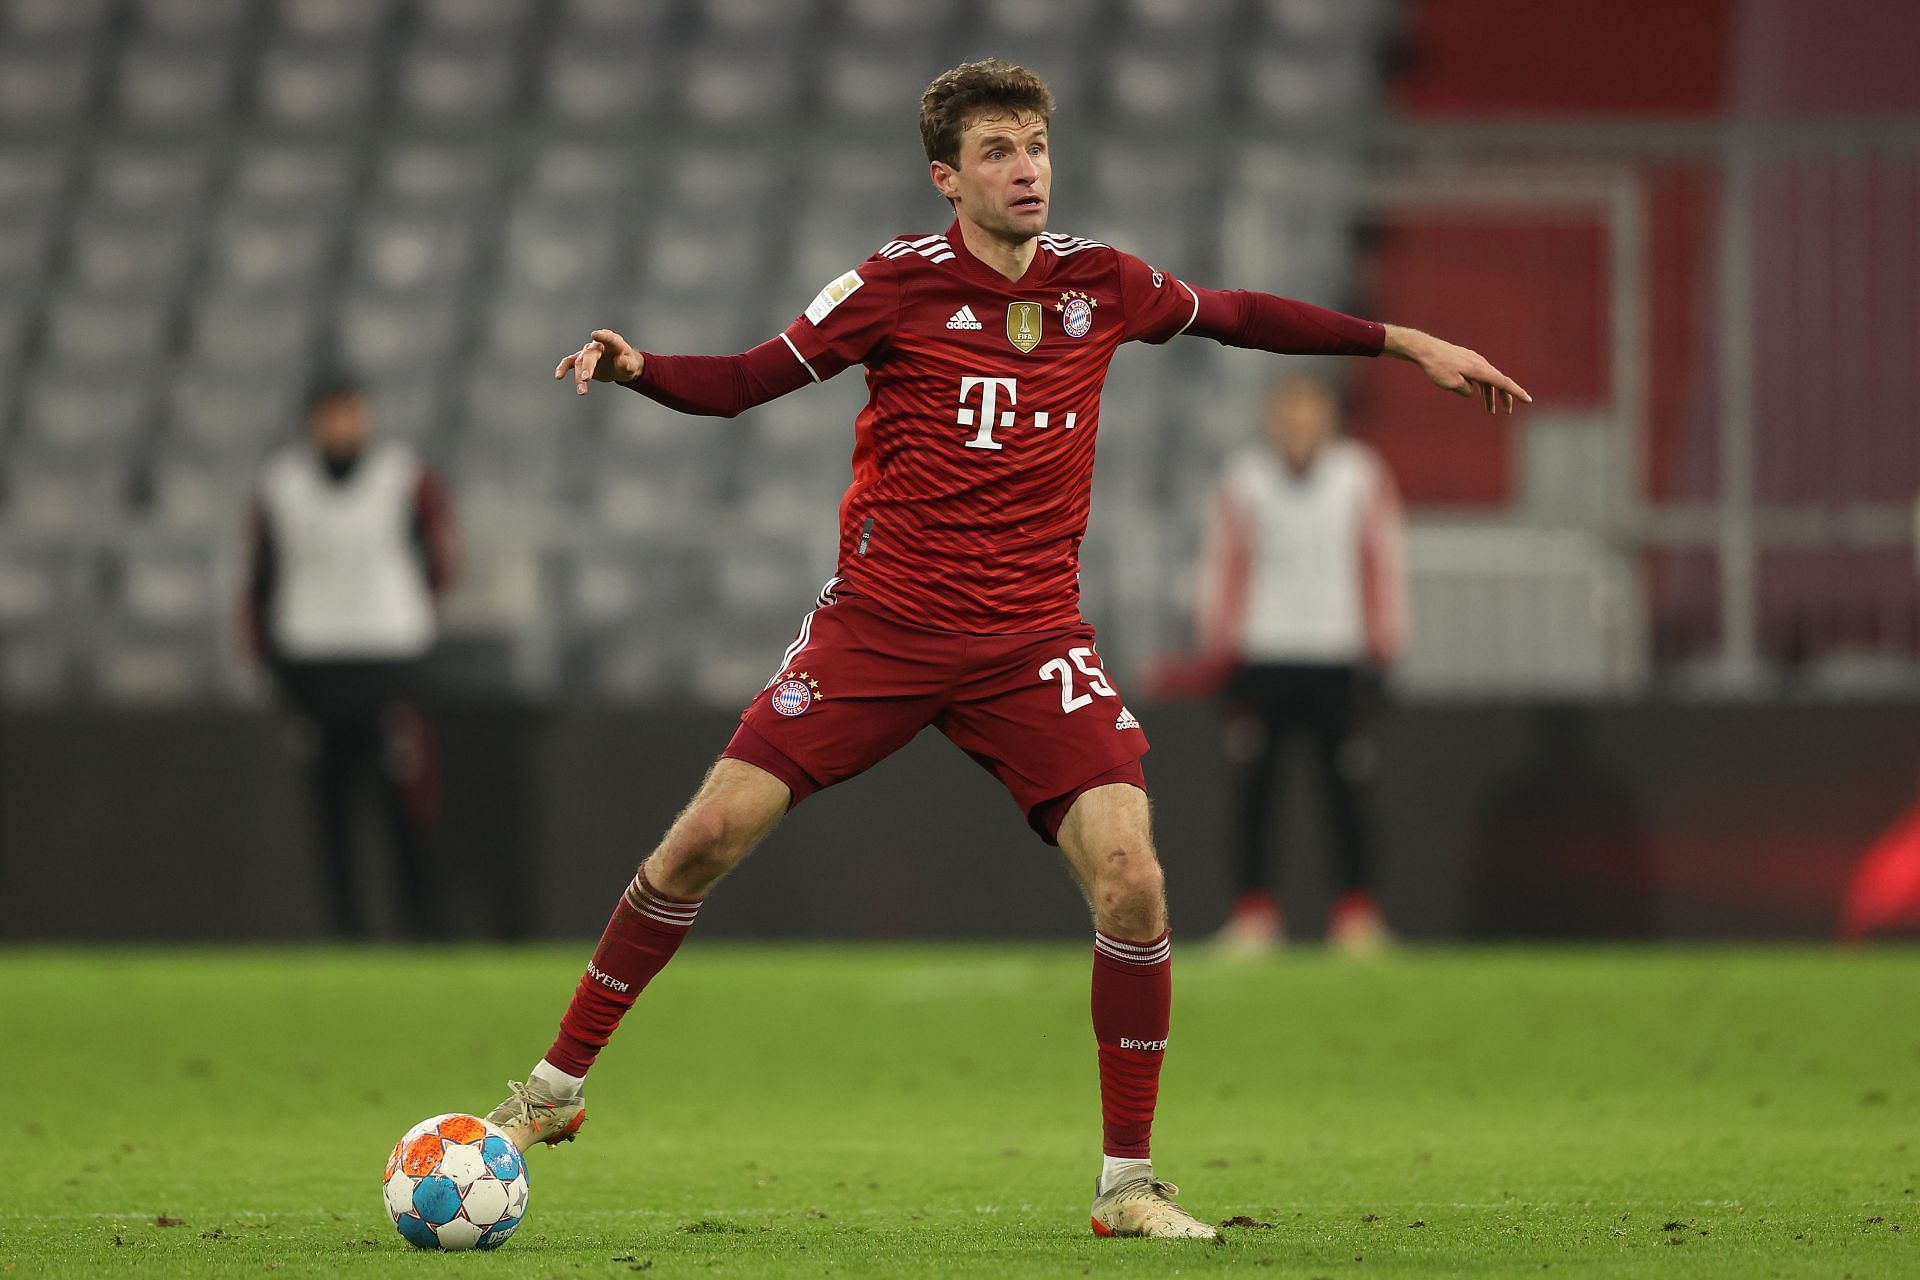 Muller already has 13 assists for the season!